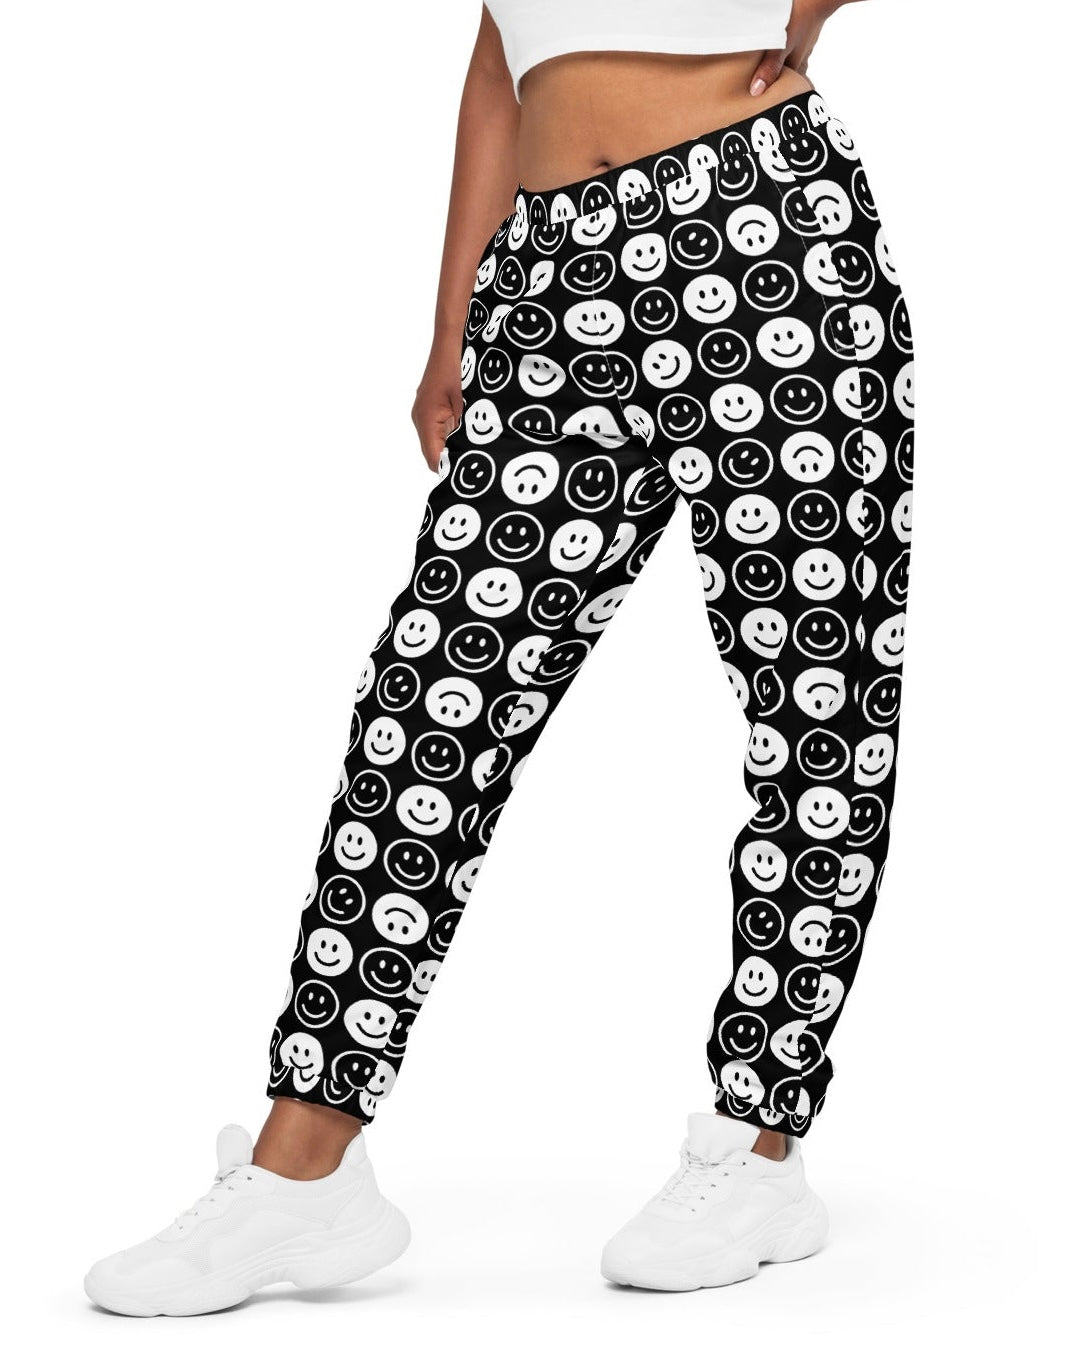 All Smiles Track Pants, Track Pants, - One Stop Rave